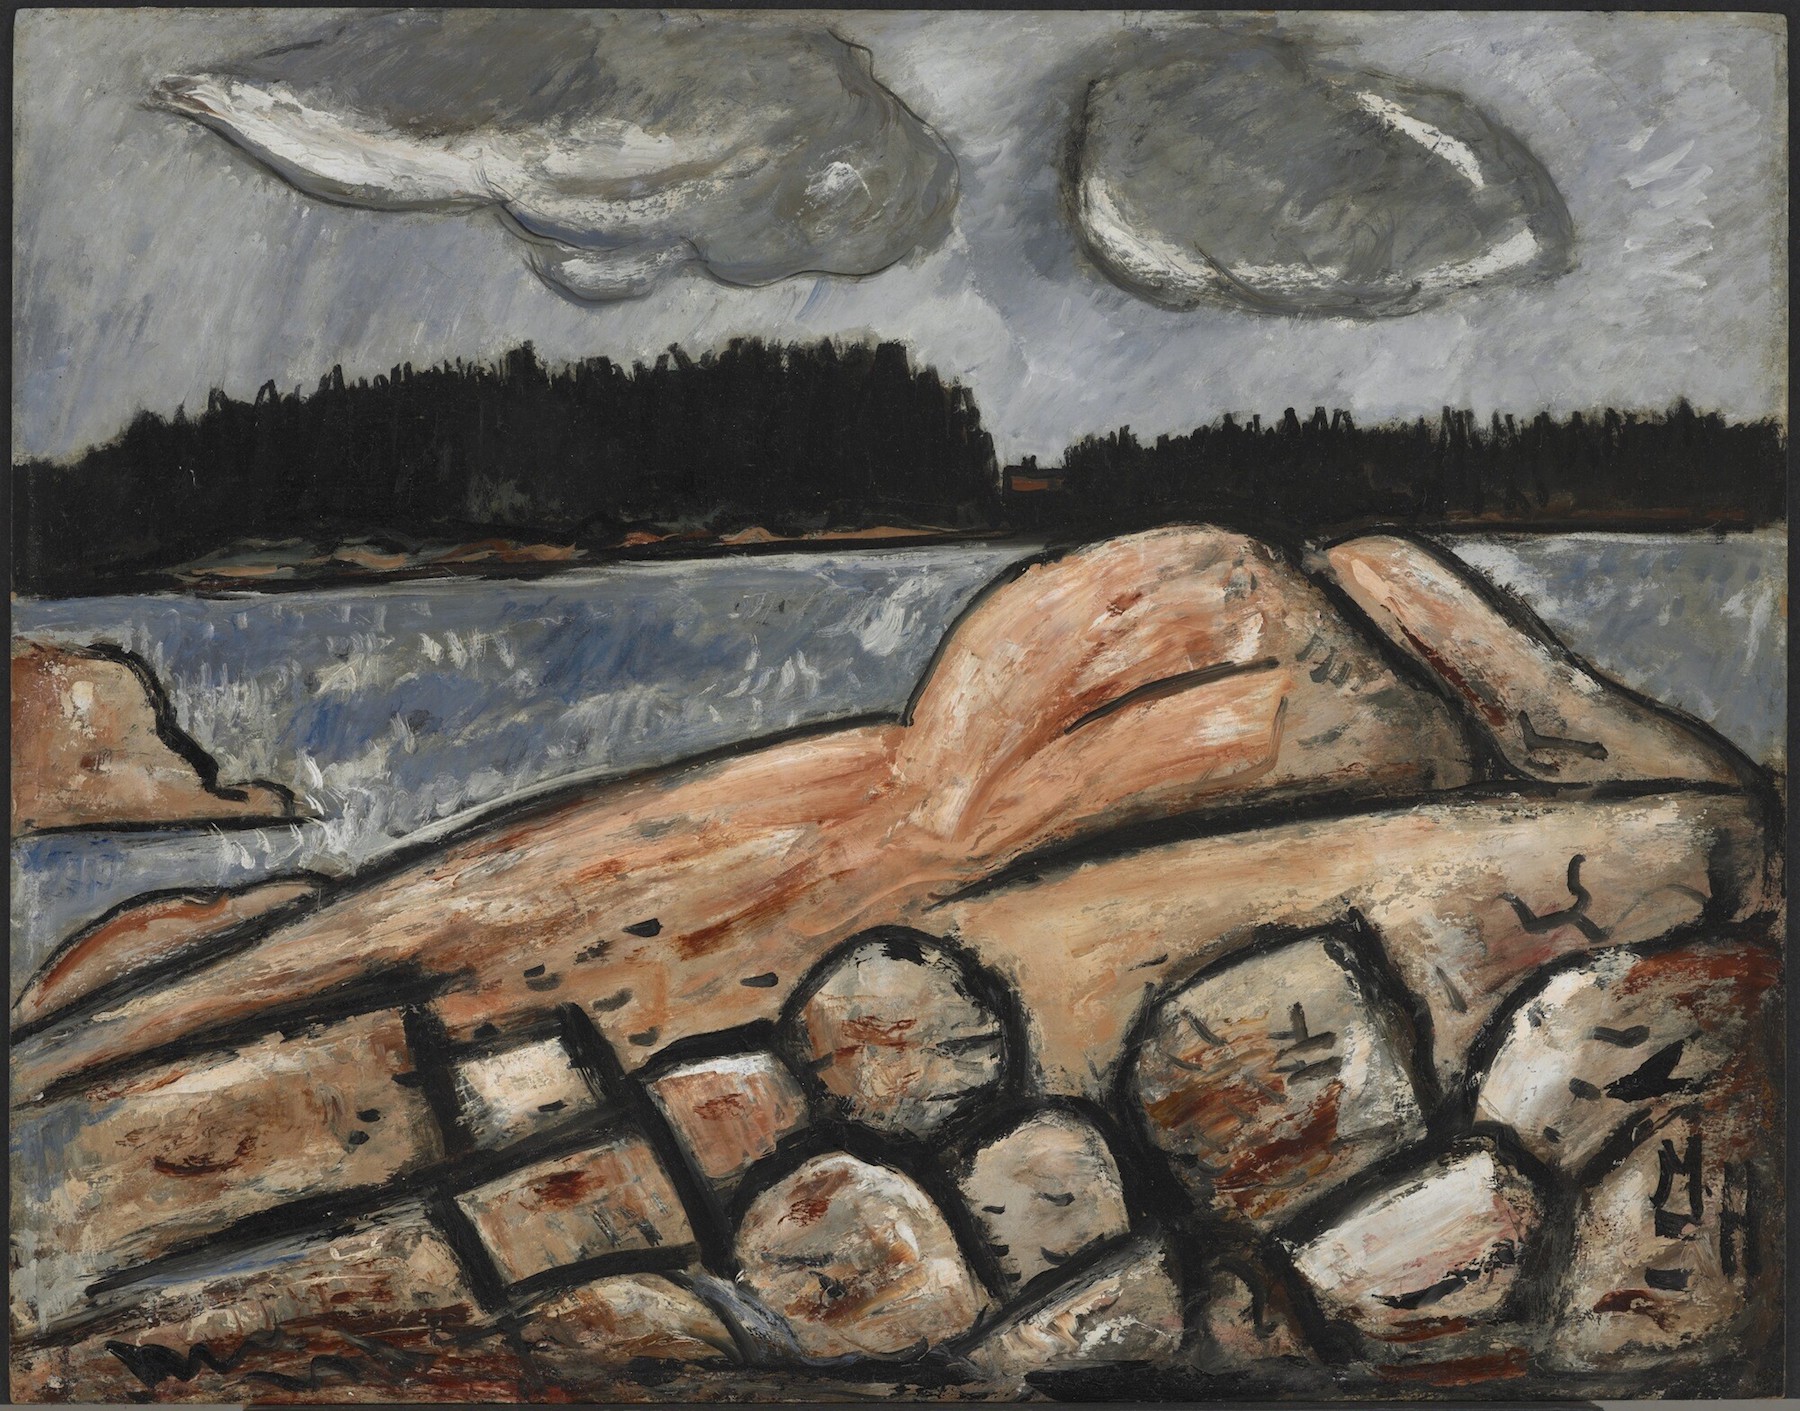 Marsden Hartley oil painting titled After the Storm, Vinalhaven, depicting the rocky Maine coast on a cloudy day